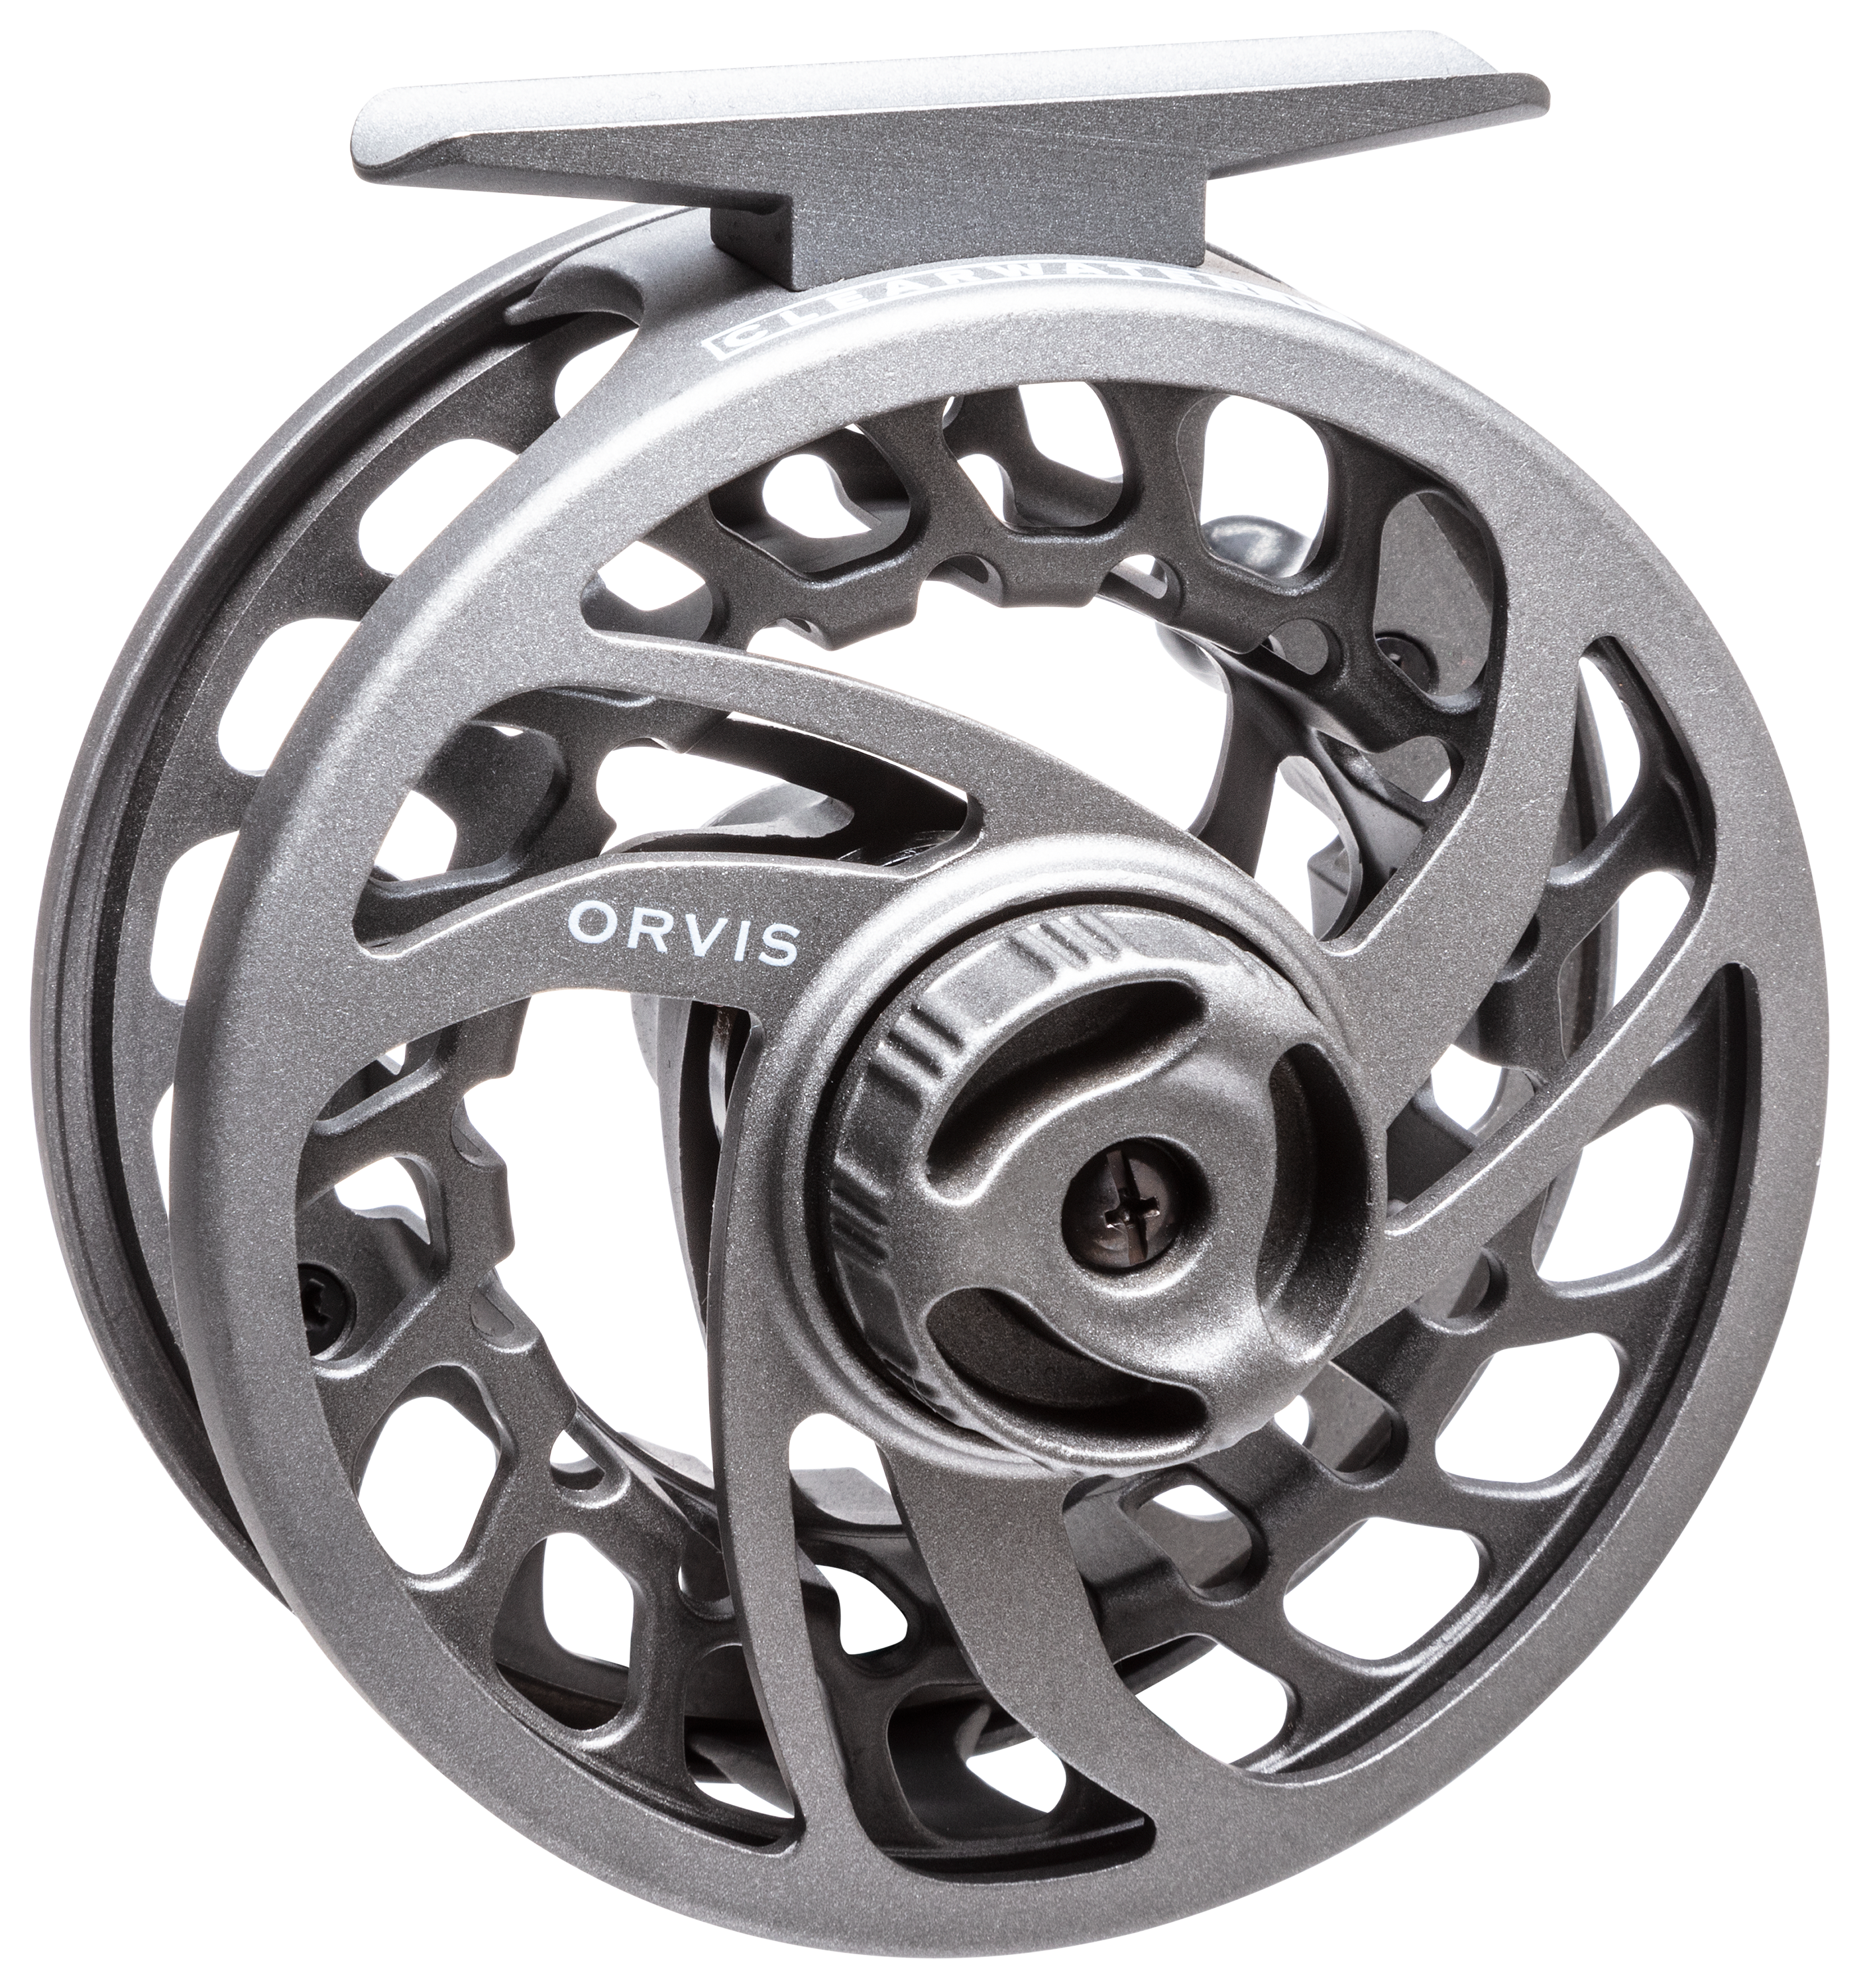 White River Fly Shop Kingfisher Fly Reel